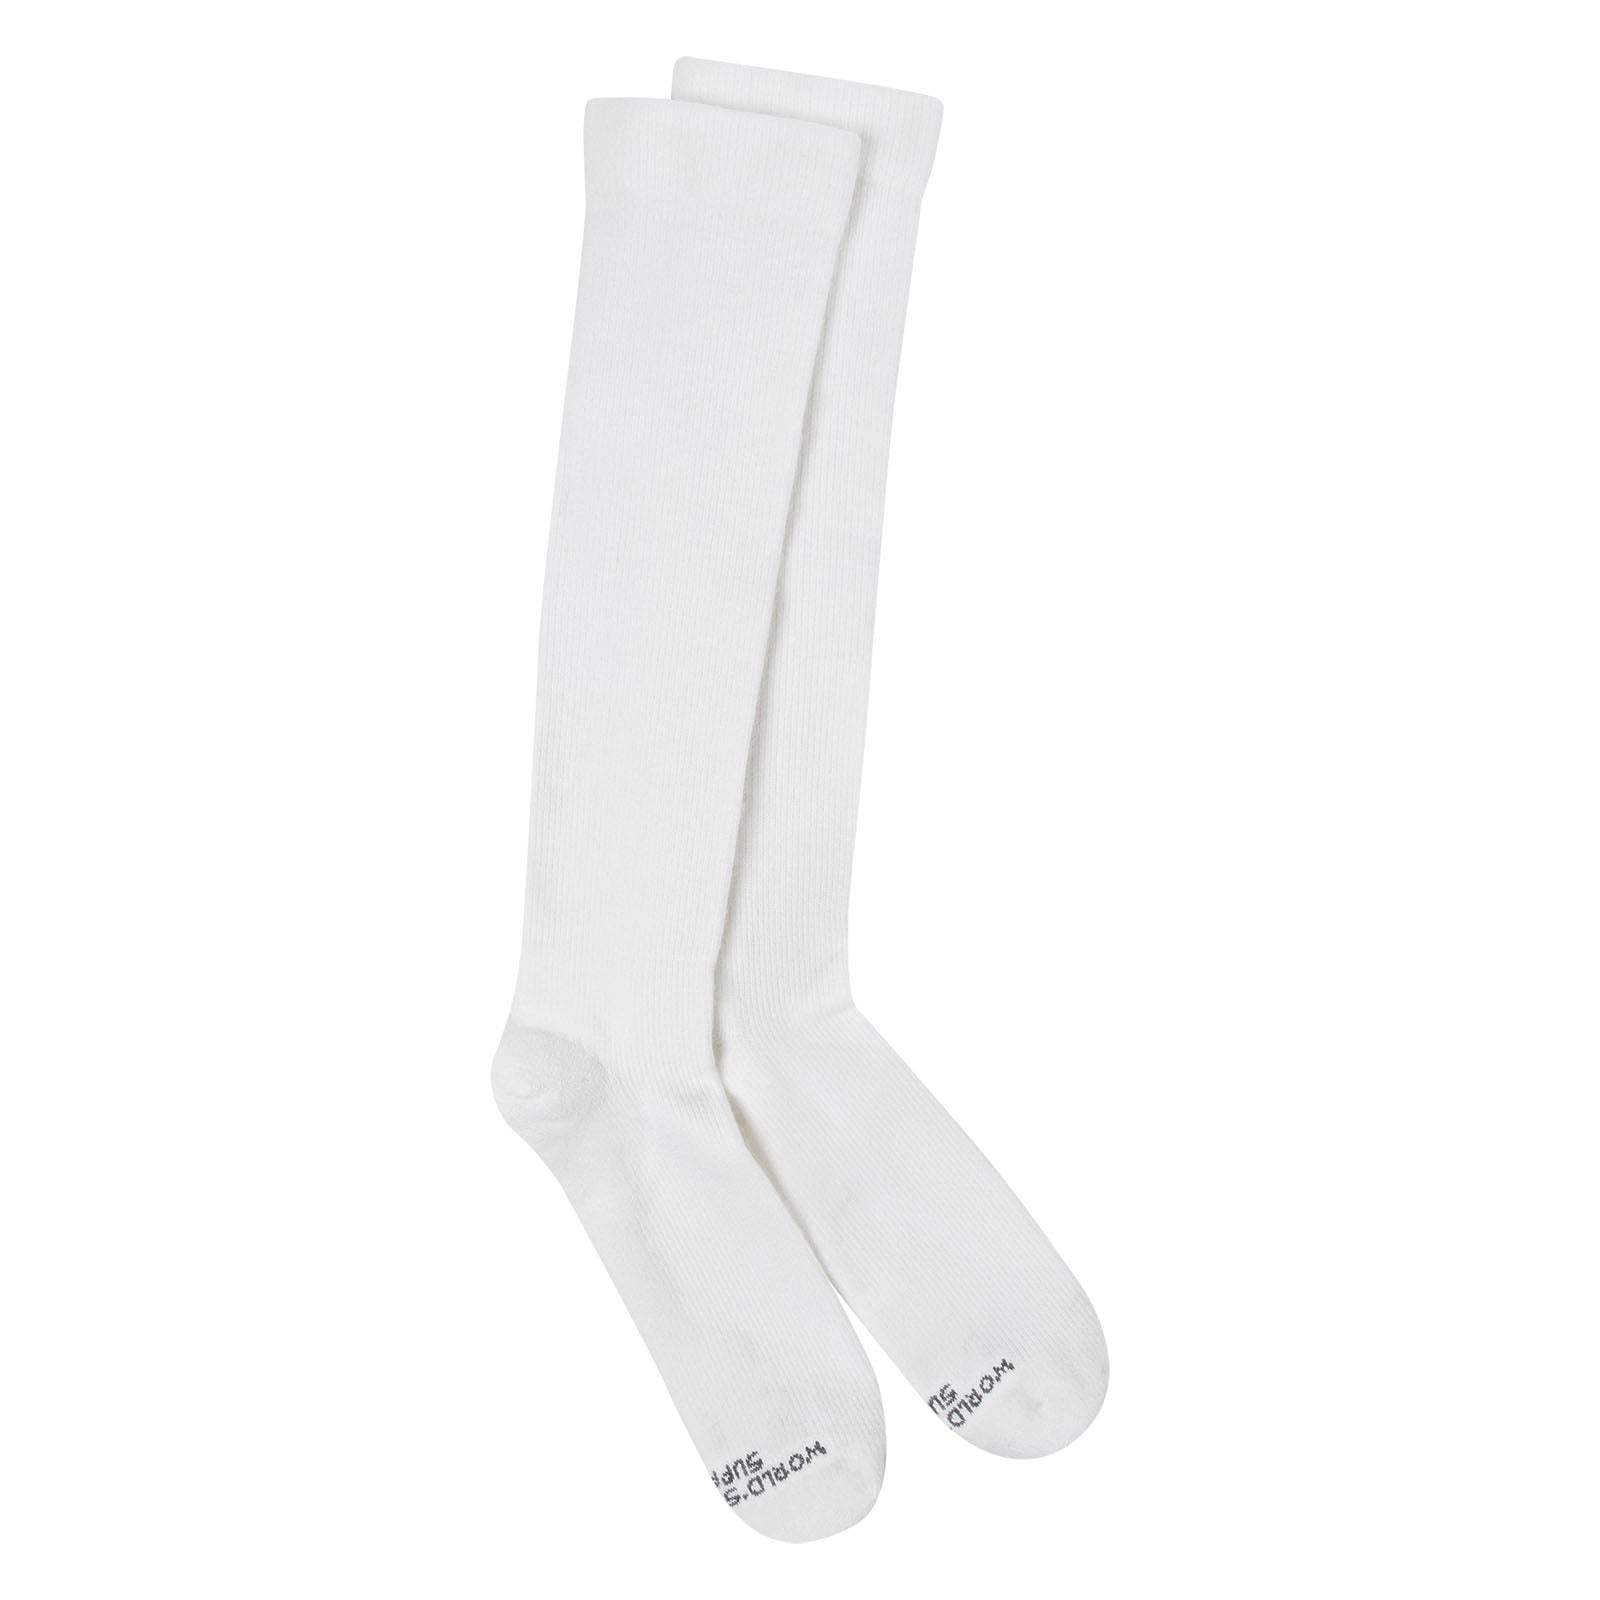 Sensitive Support Fit Fashion Knee-high White